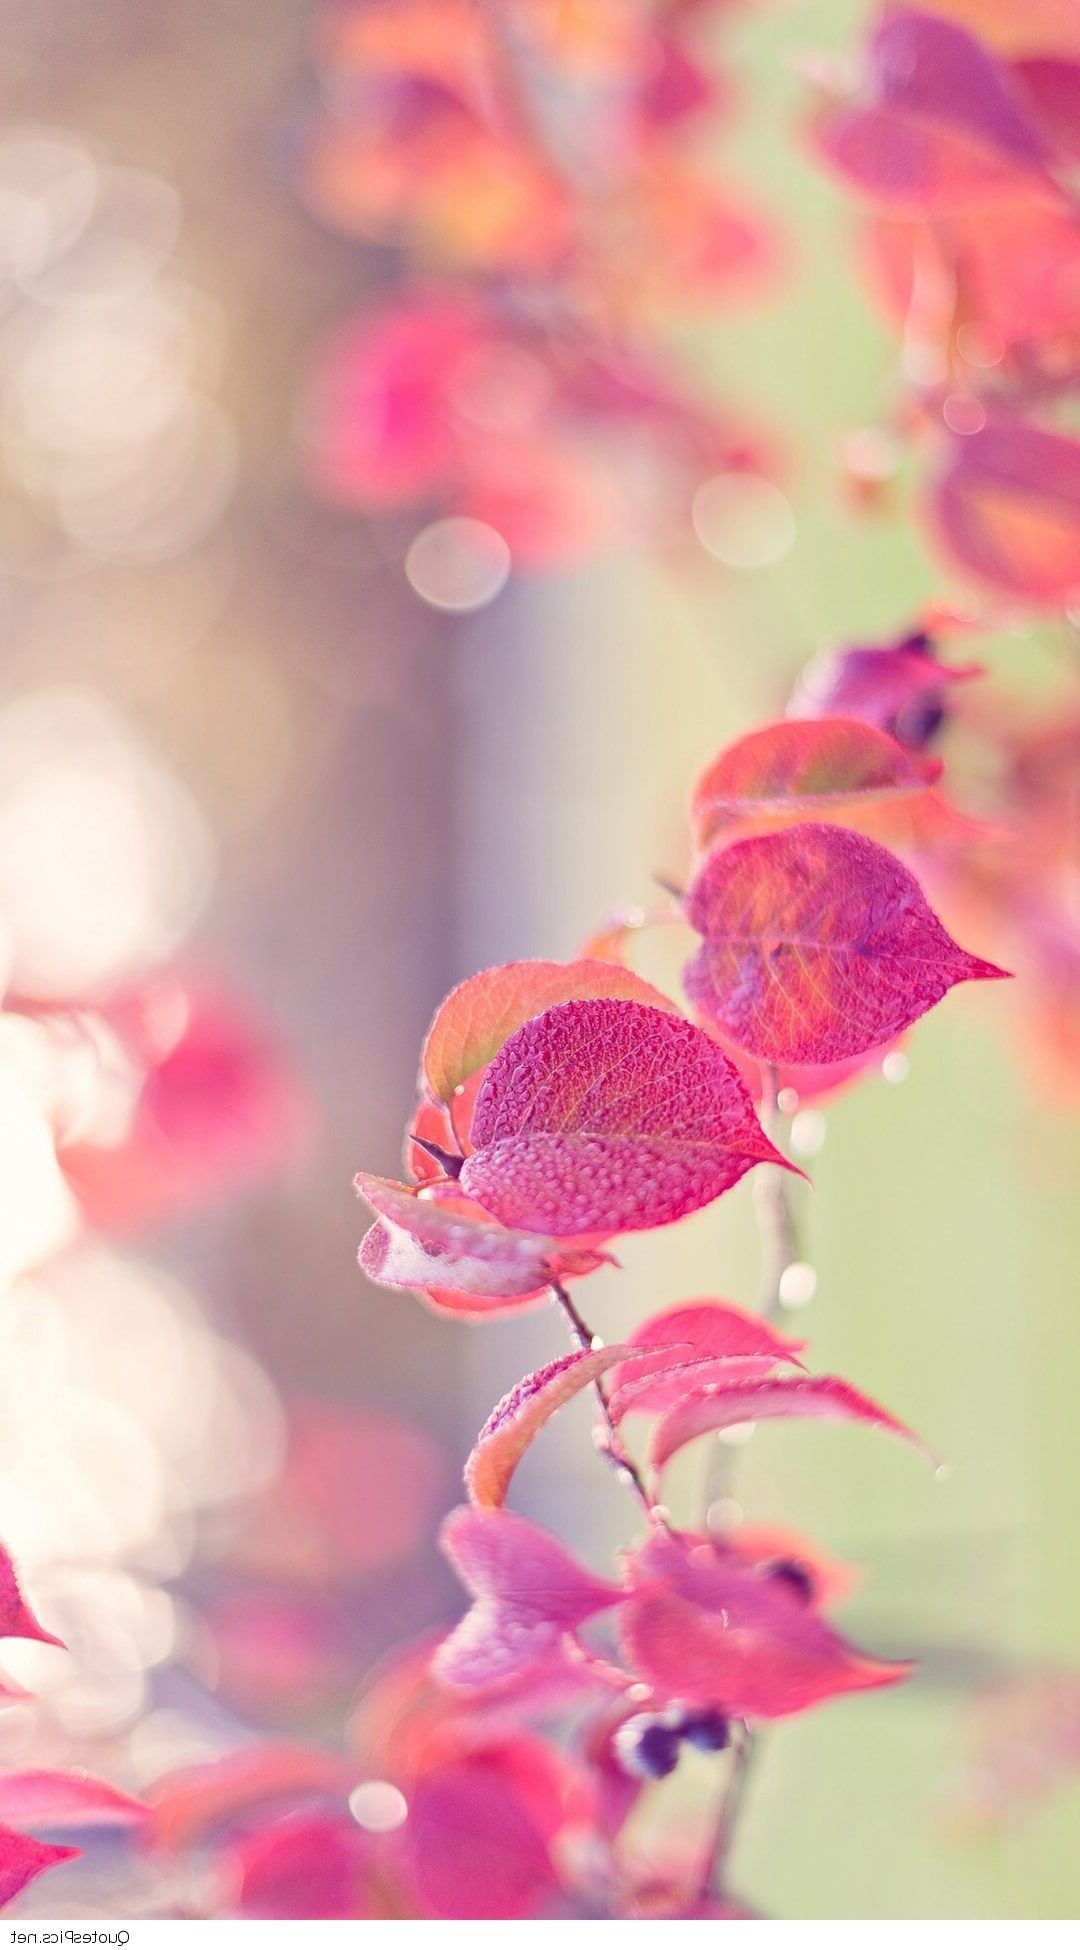 girly wallpapers,pink,red,leaf,flower,branch